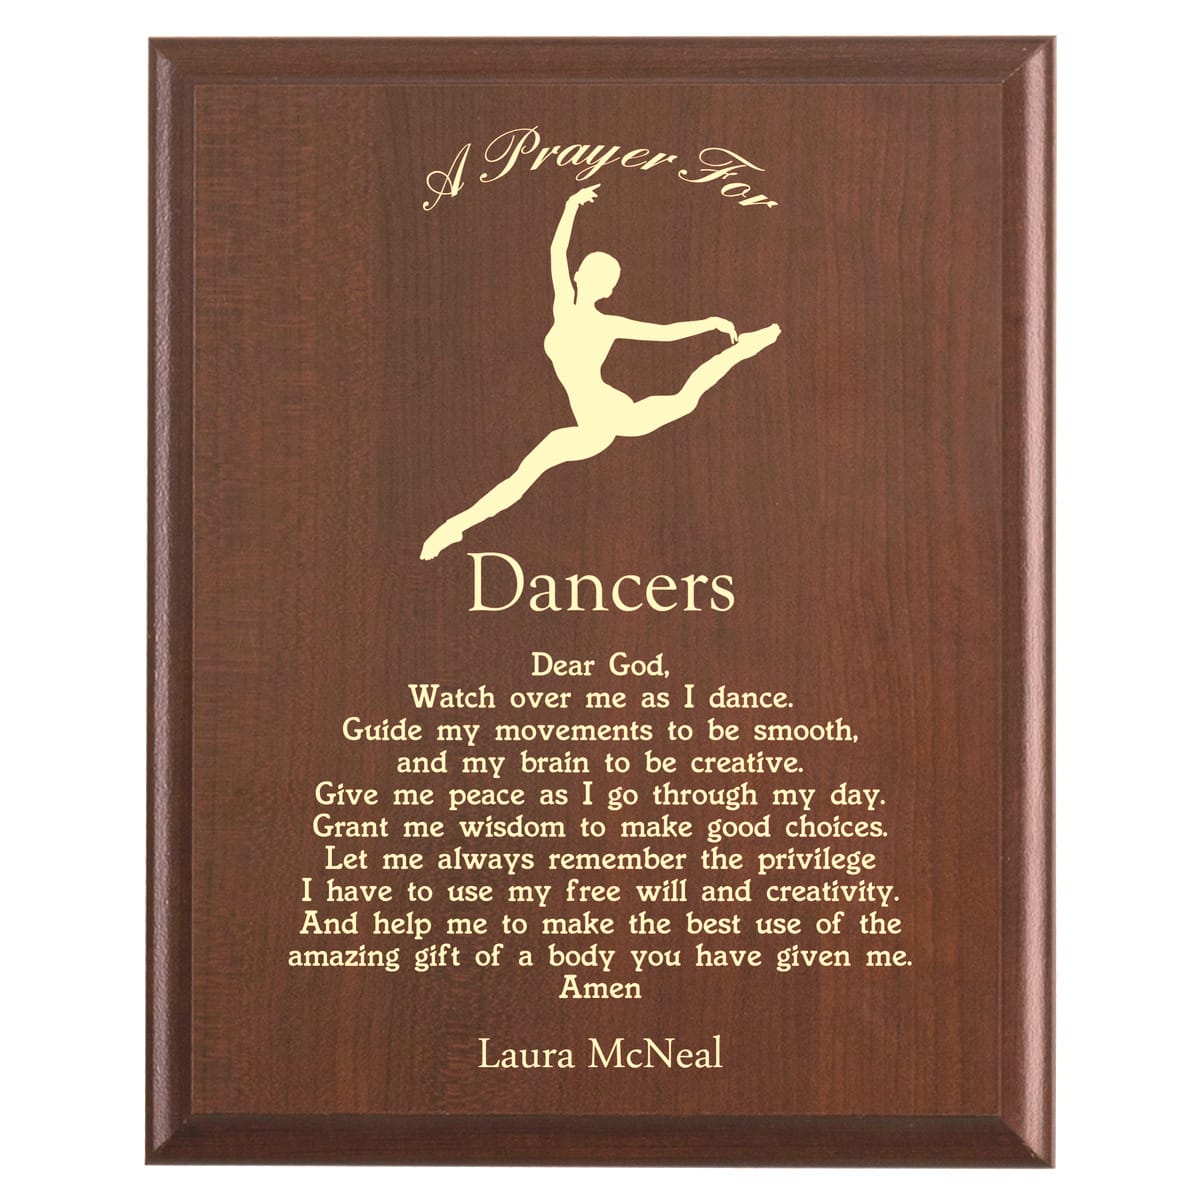 Plaque photo: Dancer Prayer Plaque design with free personalization. Wood style finish with customized text.